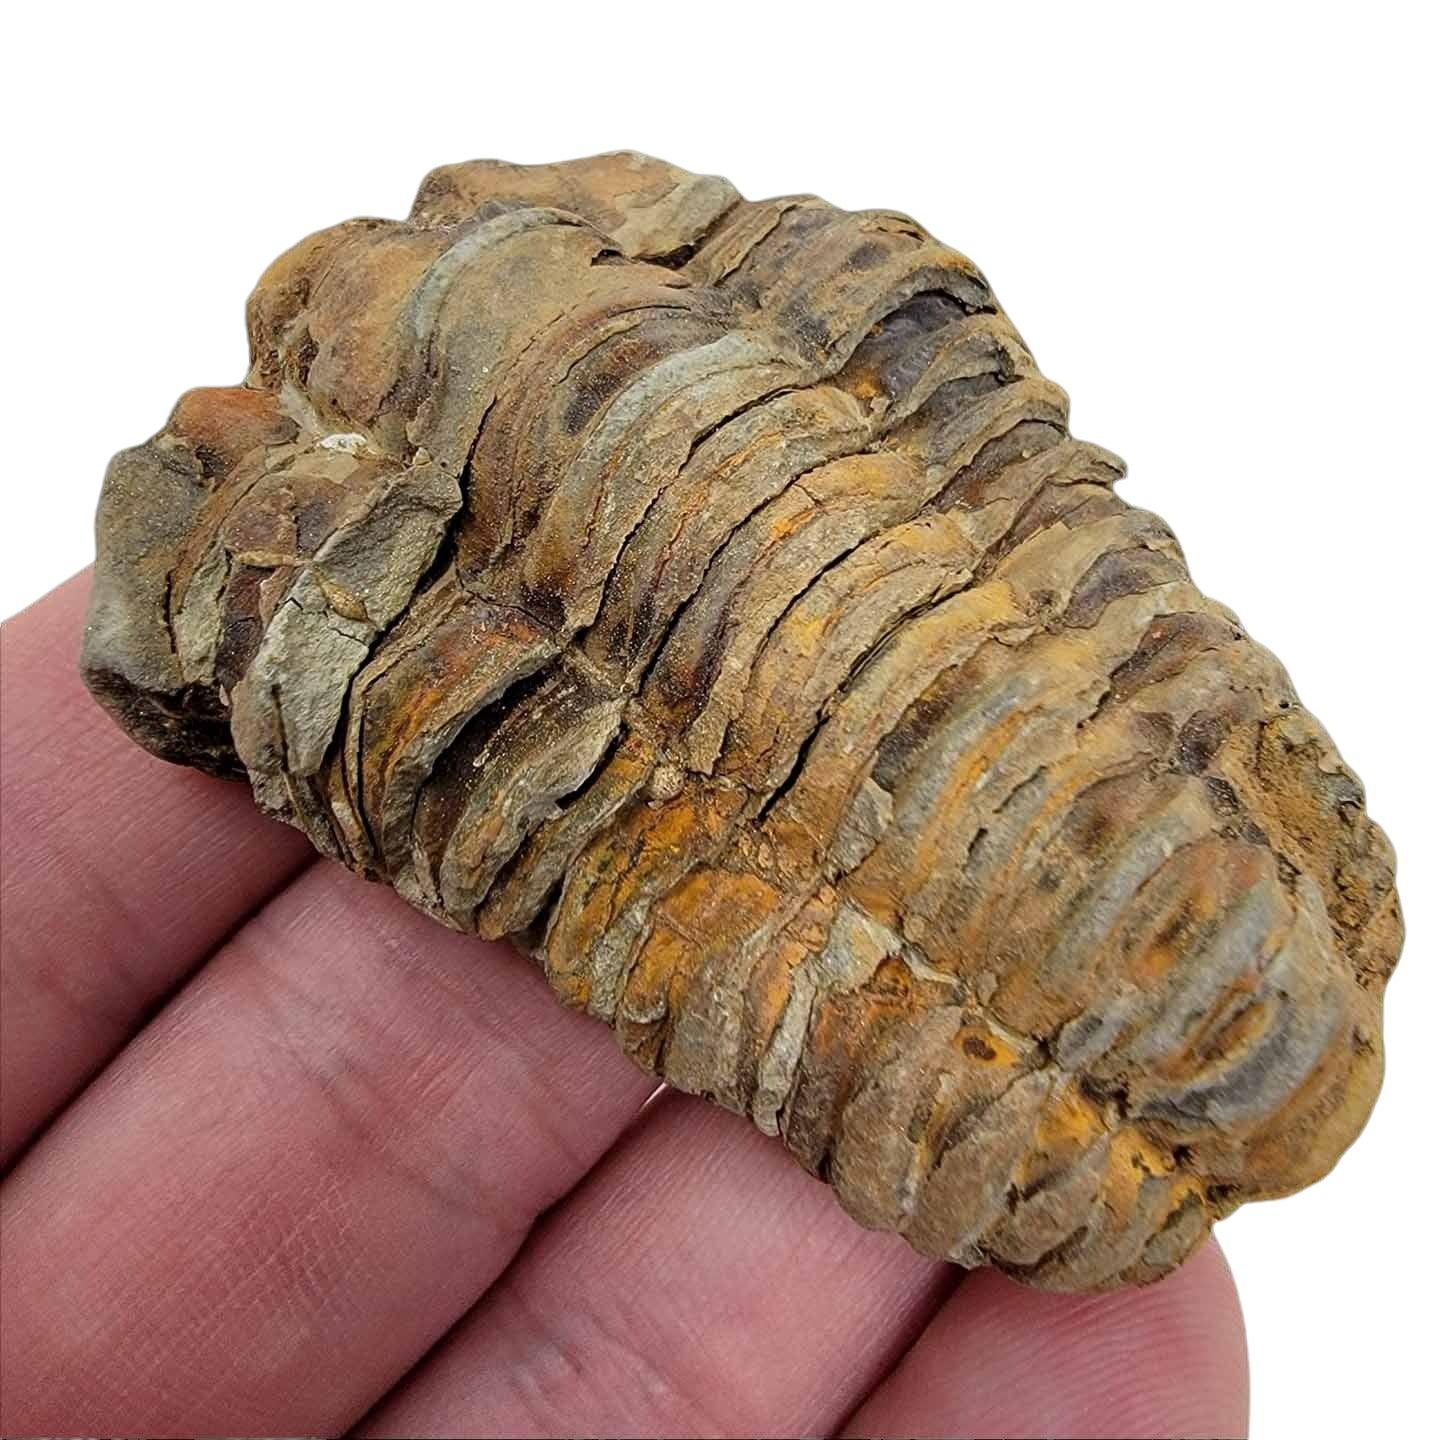 2 to 3 Inch Calymene Trilobite Fossil!  460 Million Year Old Fossil! - LapidaryCentral